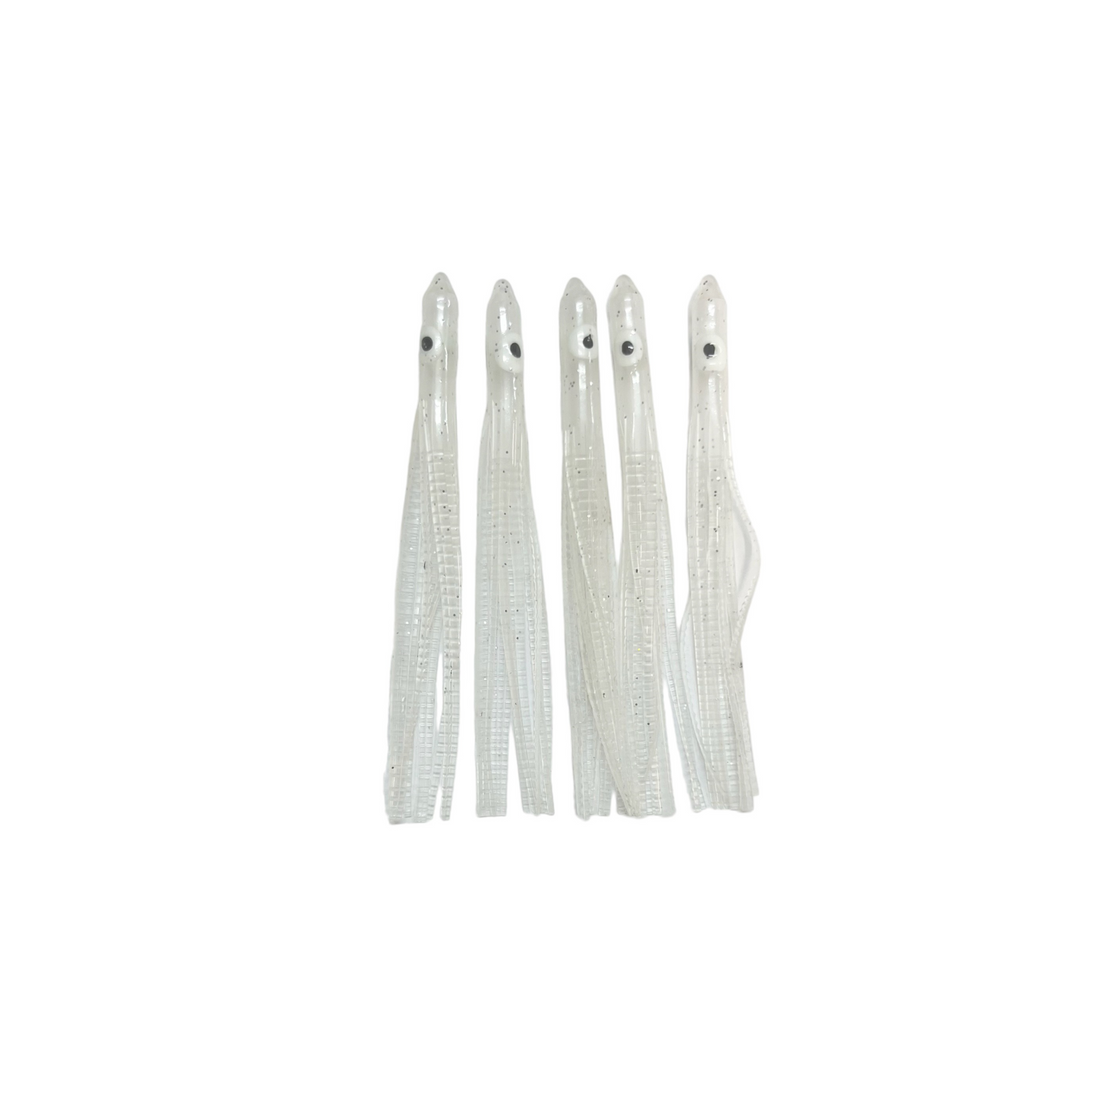 SEA HARVESTER NEEDLE FISH CLEAR 90MM 10 PACKET